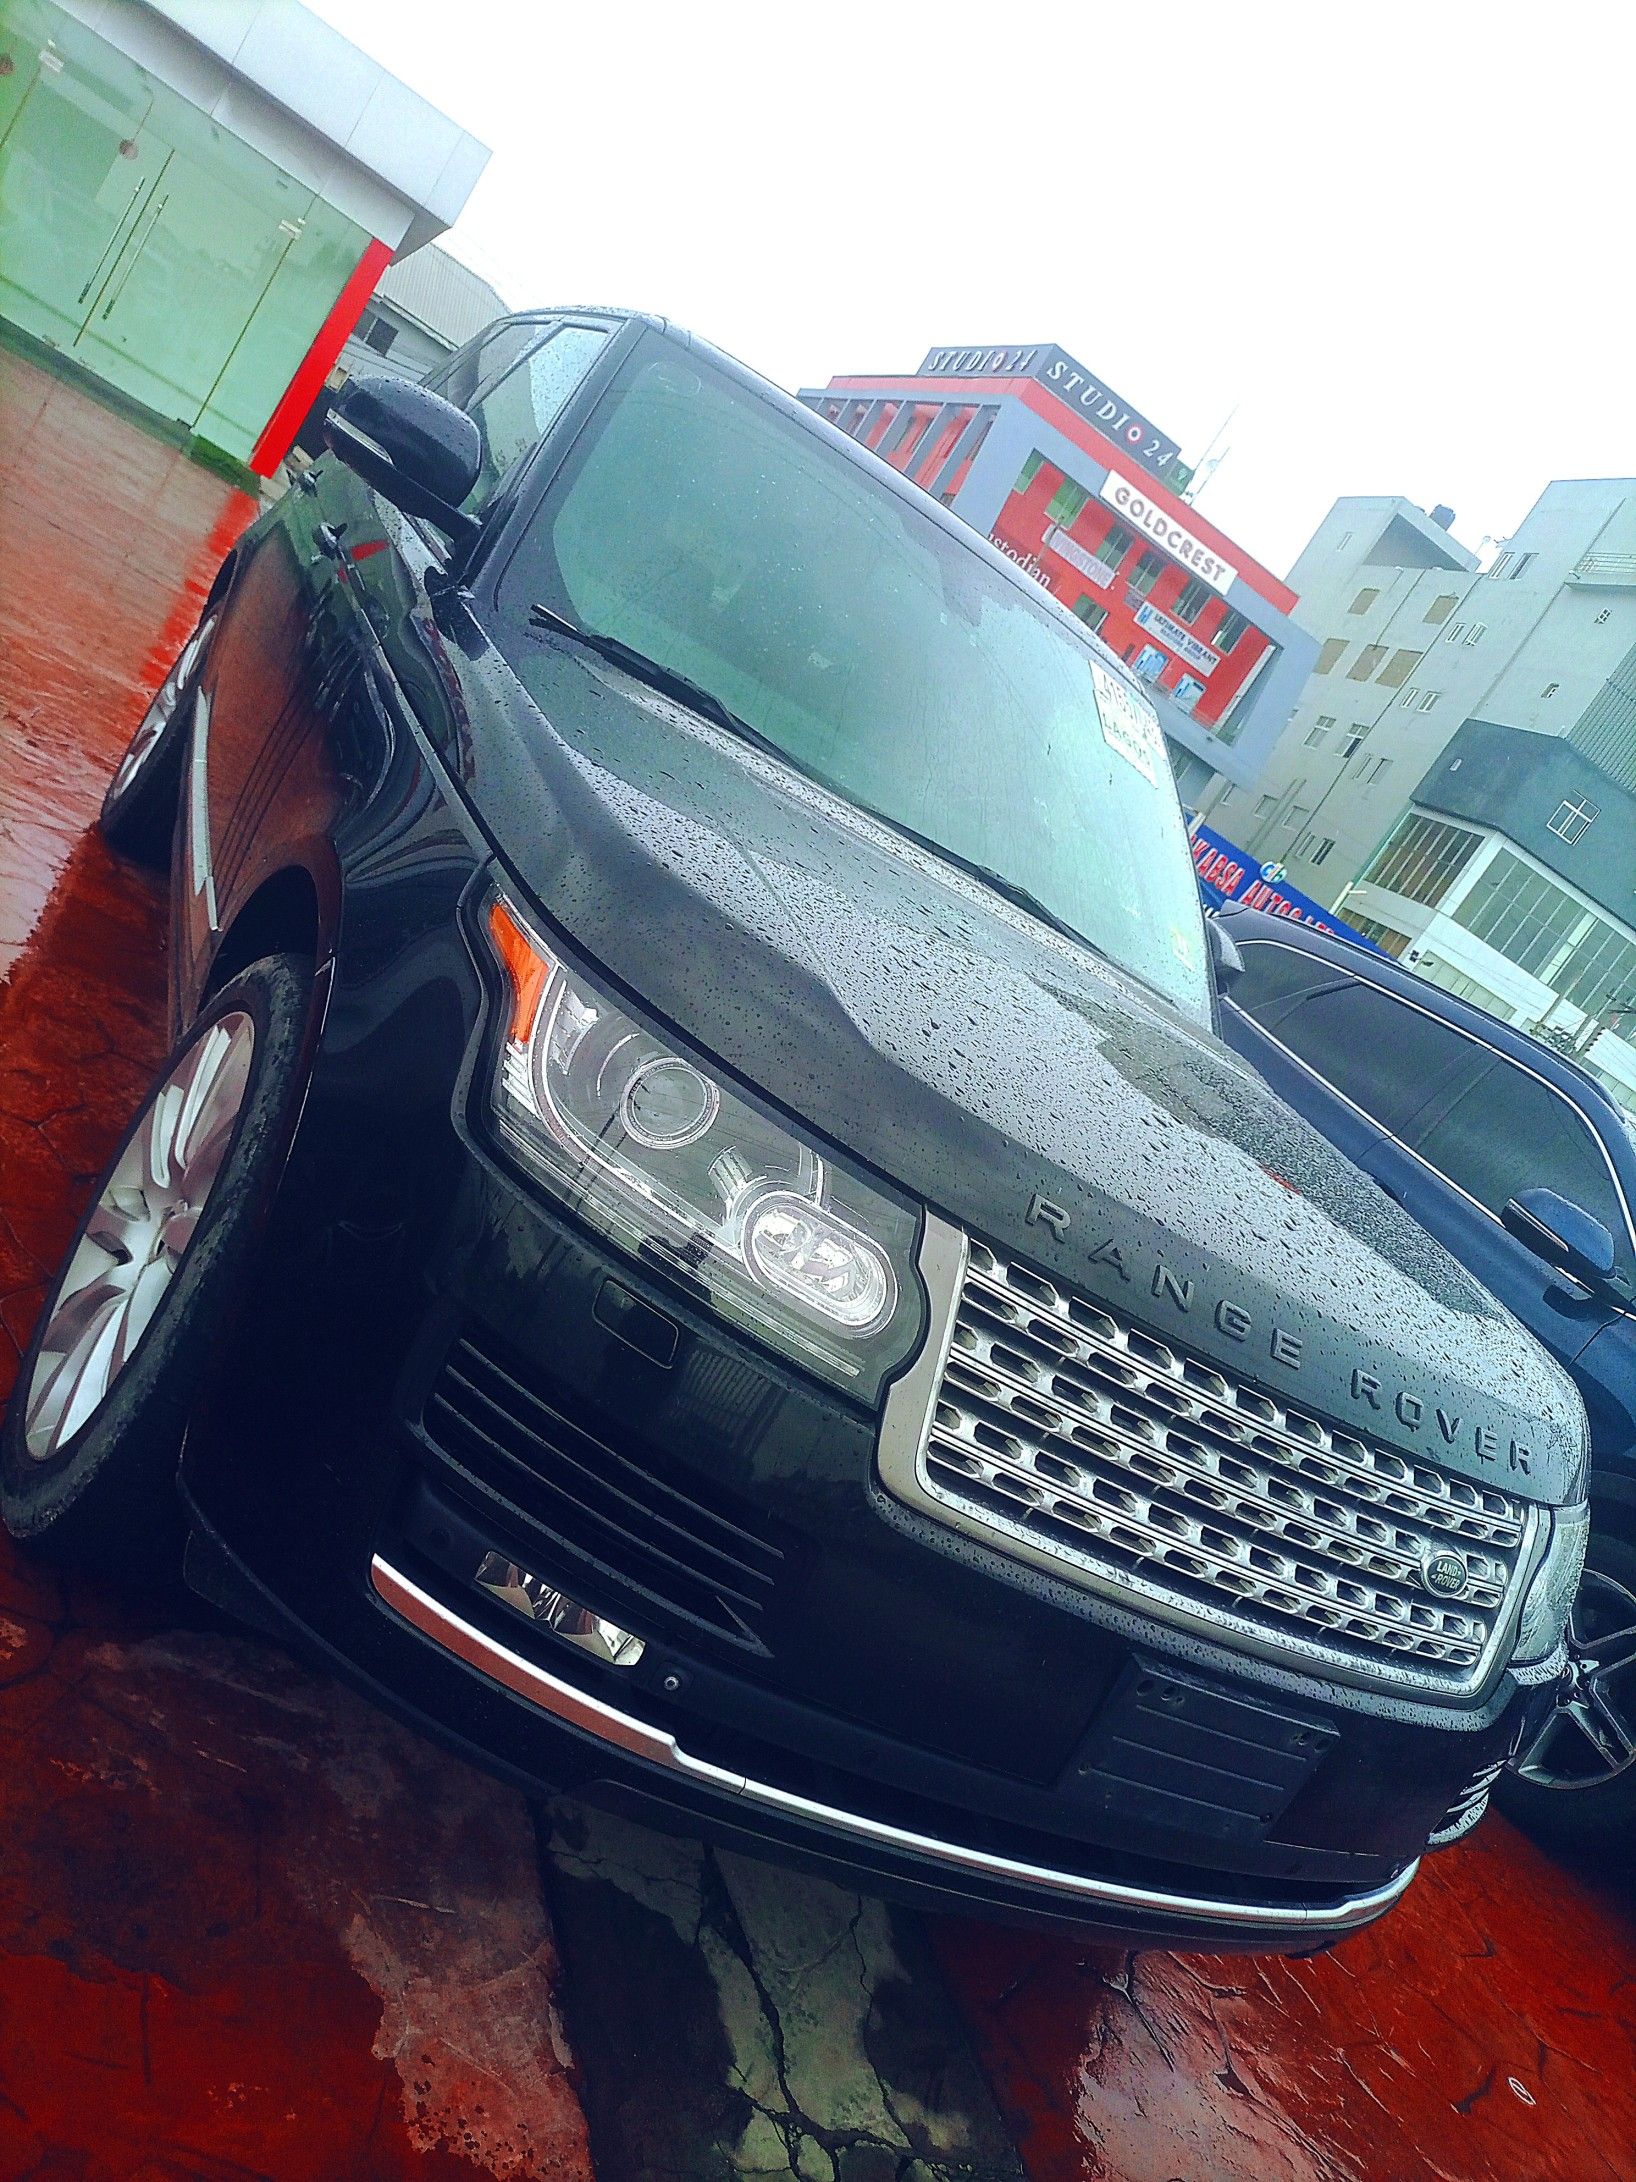 Range Rover Supercharged 2014, Vehicles